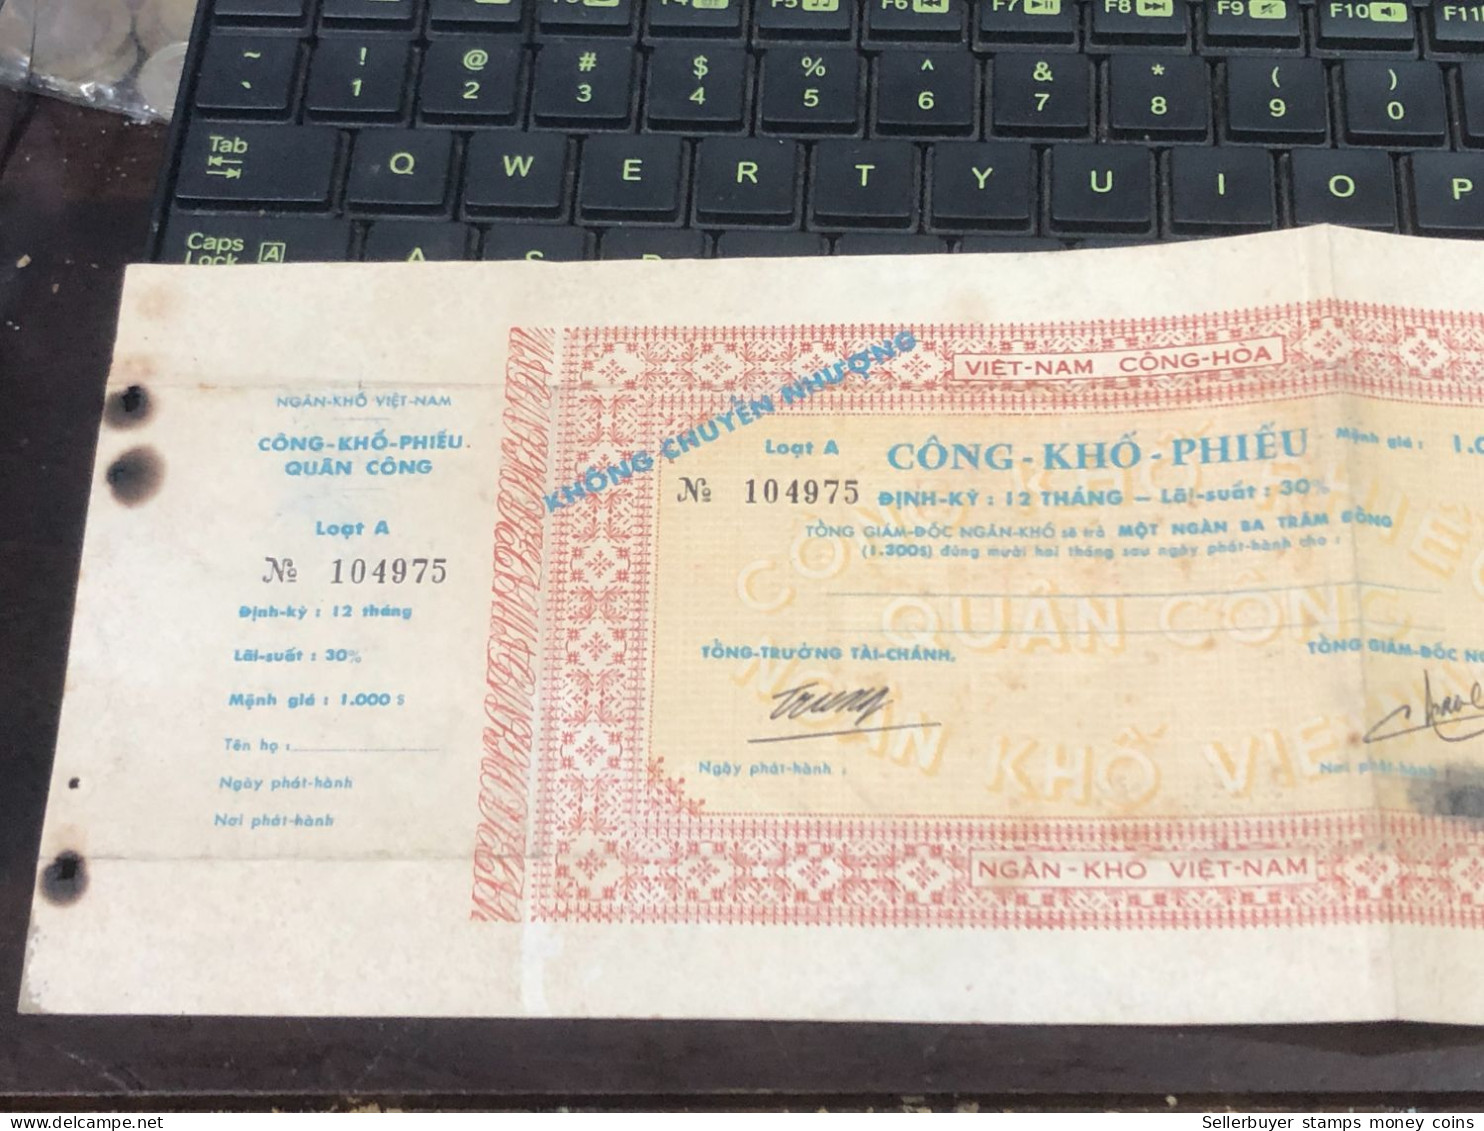 VIET NAM SOUTH CONG VIETNAM TREASURY BOND Paper PARVALUE 1000 VND BEFORE 1975/-1PCS RARE - Cheques & Traveler's Cheques